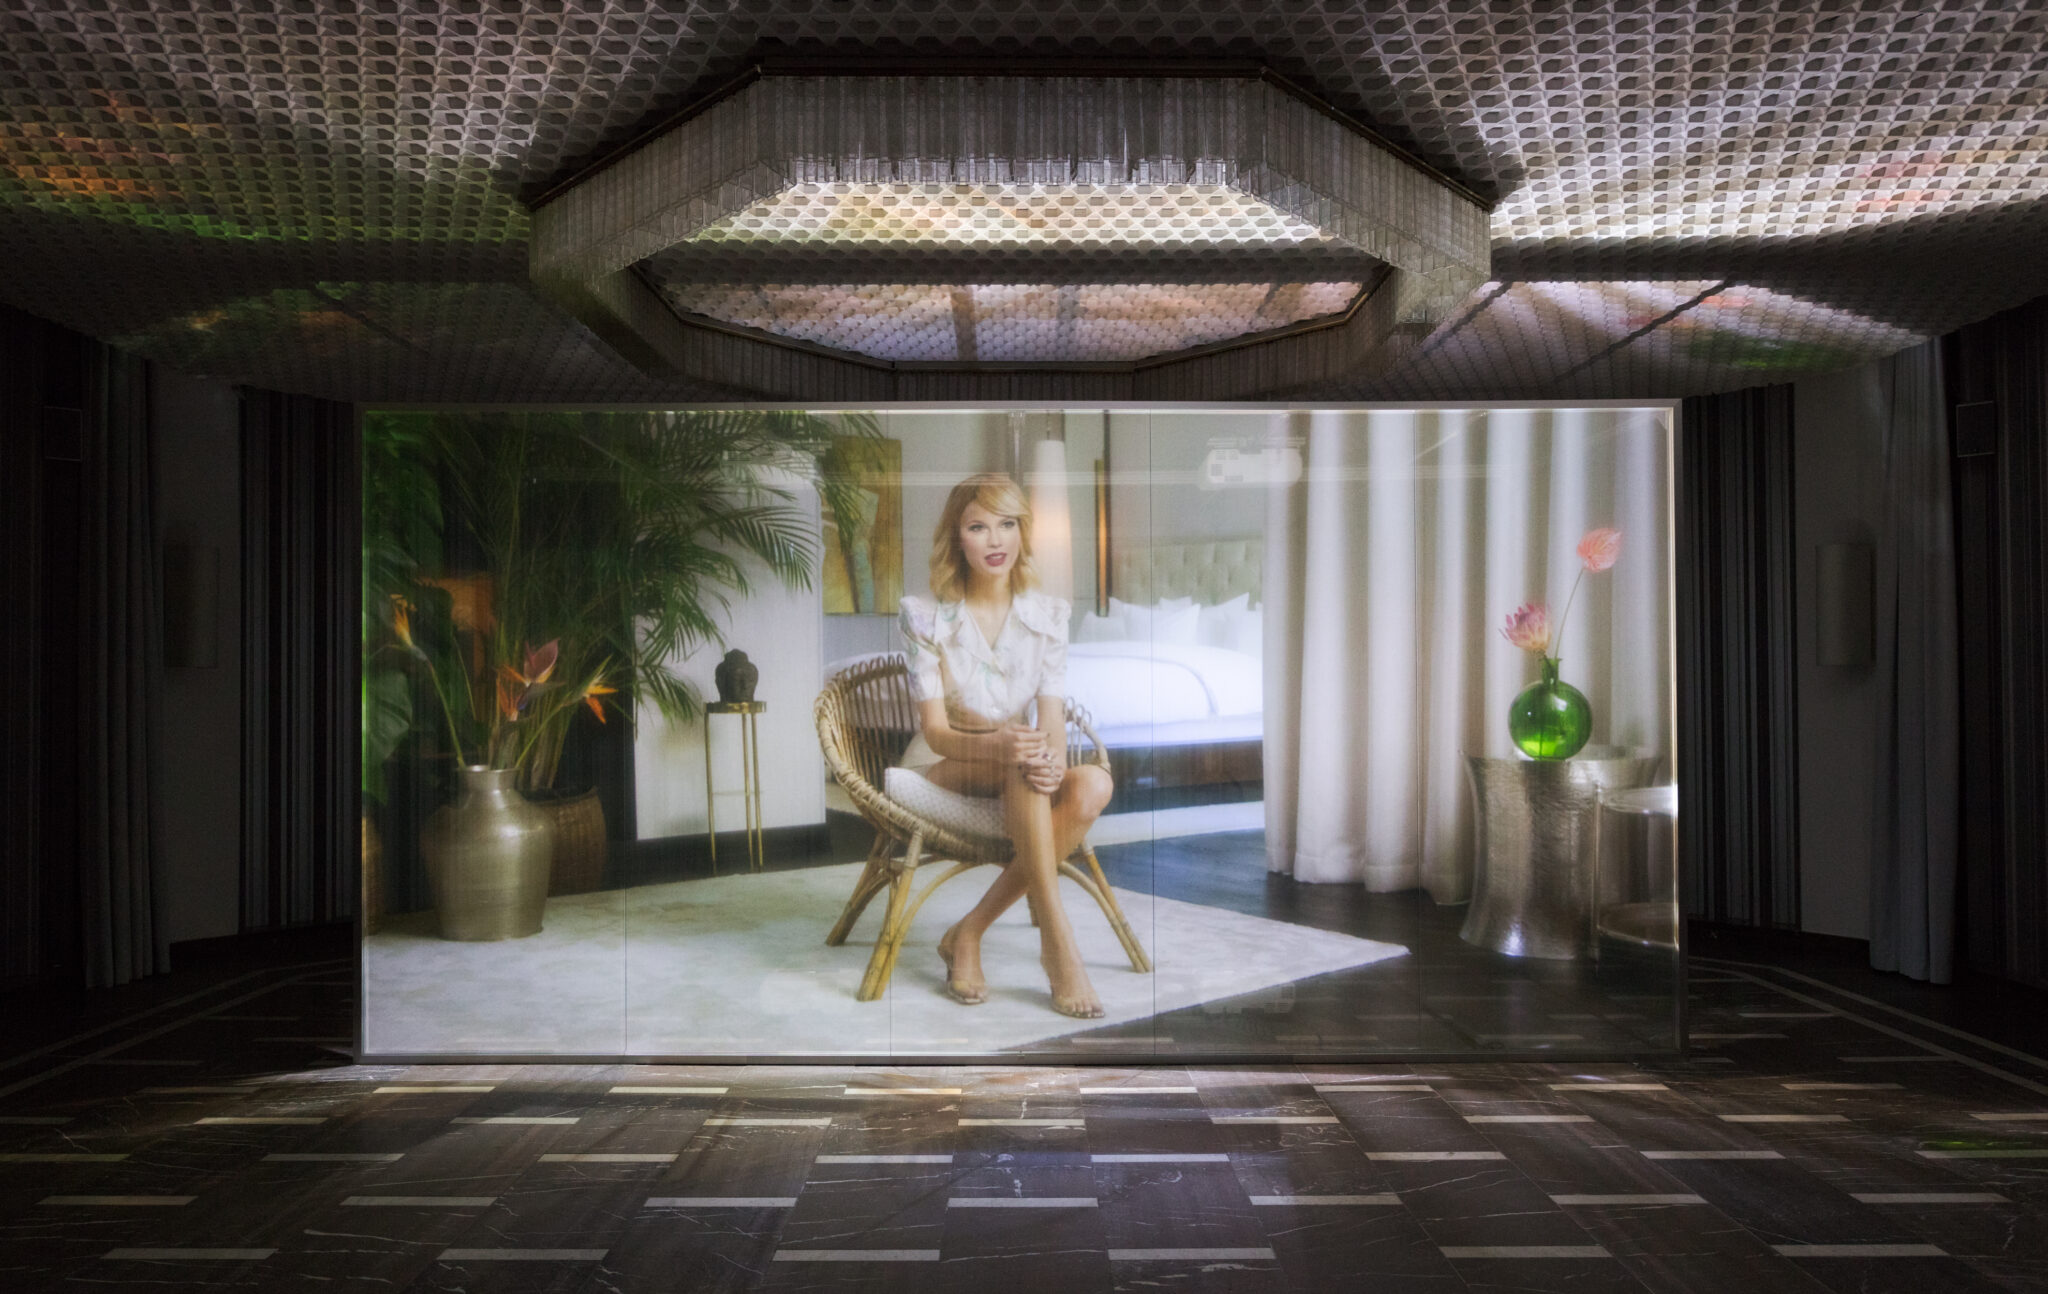 A deepfake video still of singer Taylor Swift, projected on a large rectangular screen in a dimly lit room. The deepfake Taylor Swift sits on a woven rattan chair, wearing a white short-sleeved dress, sitting crossed leg with hands on her right knee.